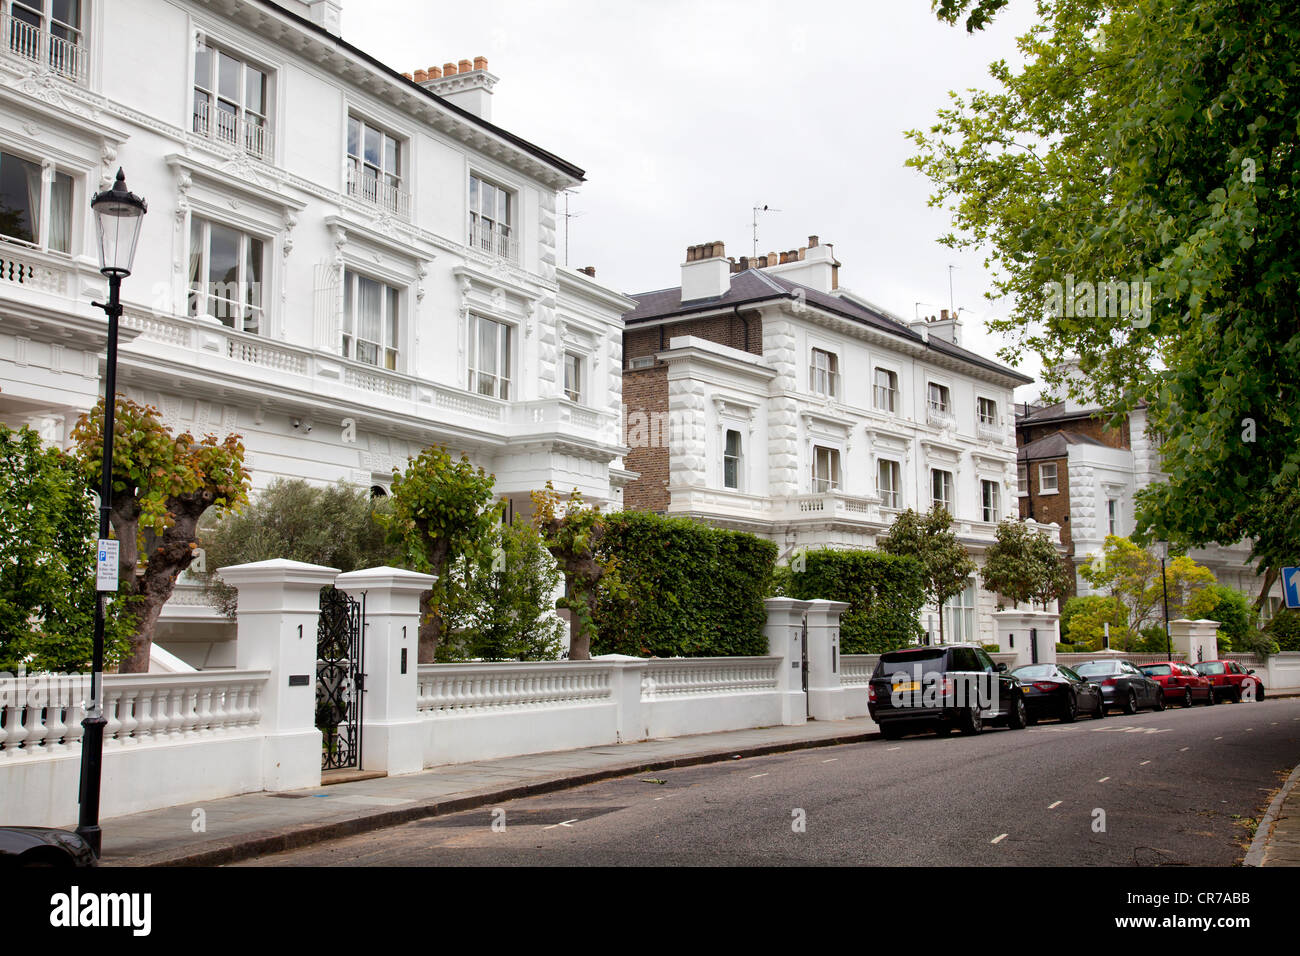 Large houses in the Boltons in London UK Stock Photo